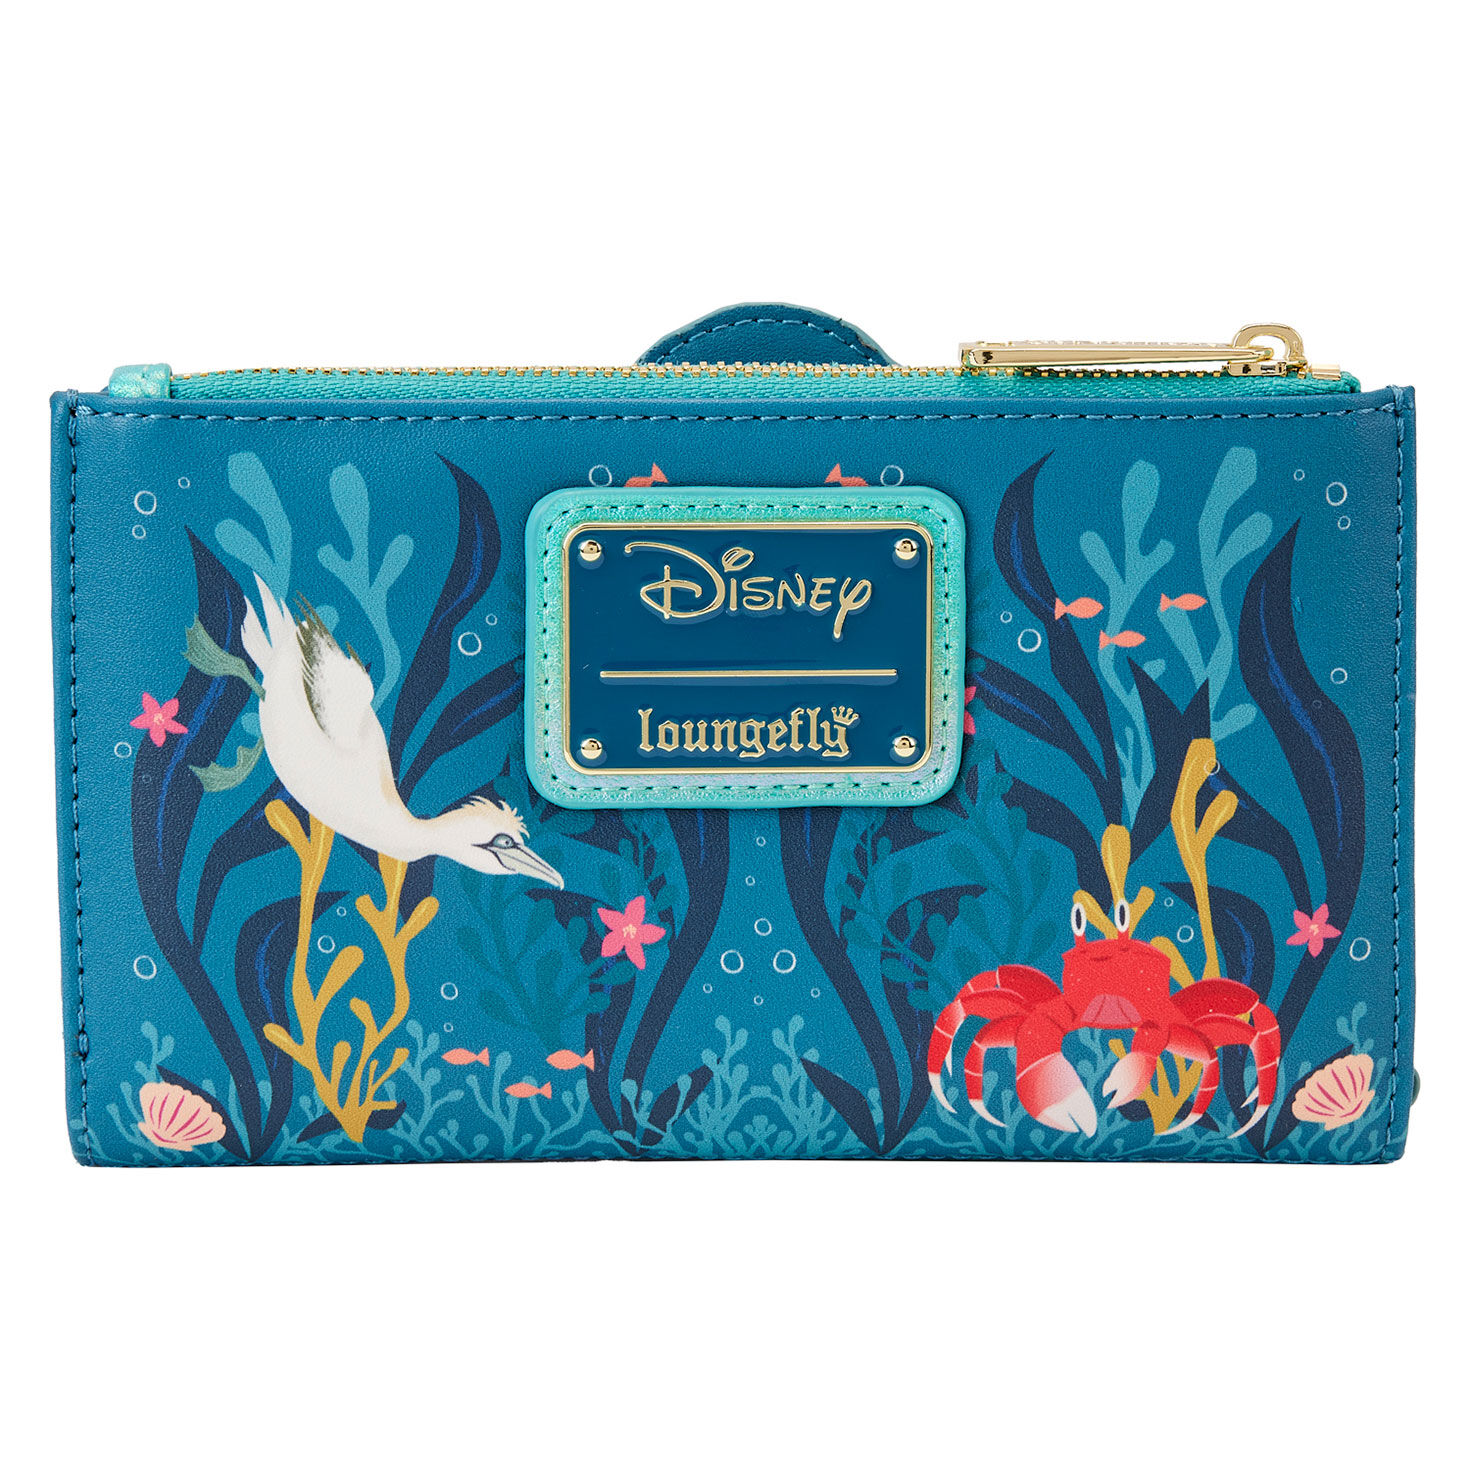 New Navy and Rose Gold Loungefly Disney Cruise Line Merchandise Collection  Is A Show Stopper | Disney bags backpacks, Disney purse, Bags